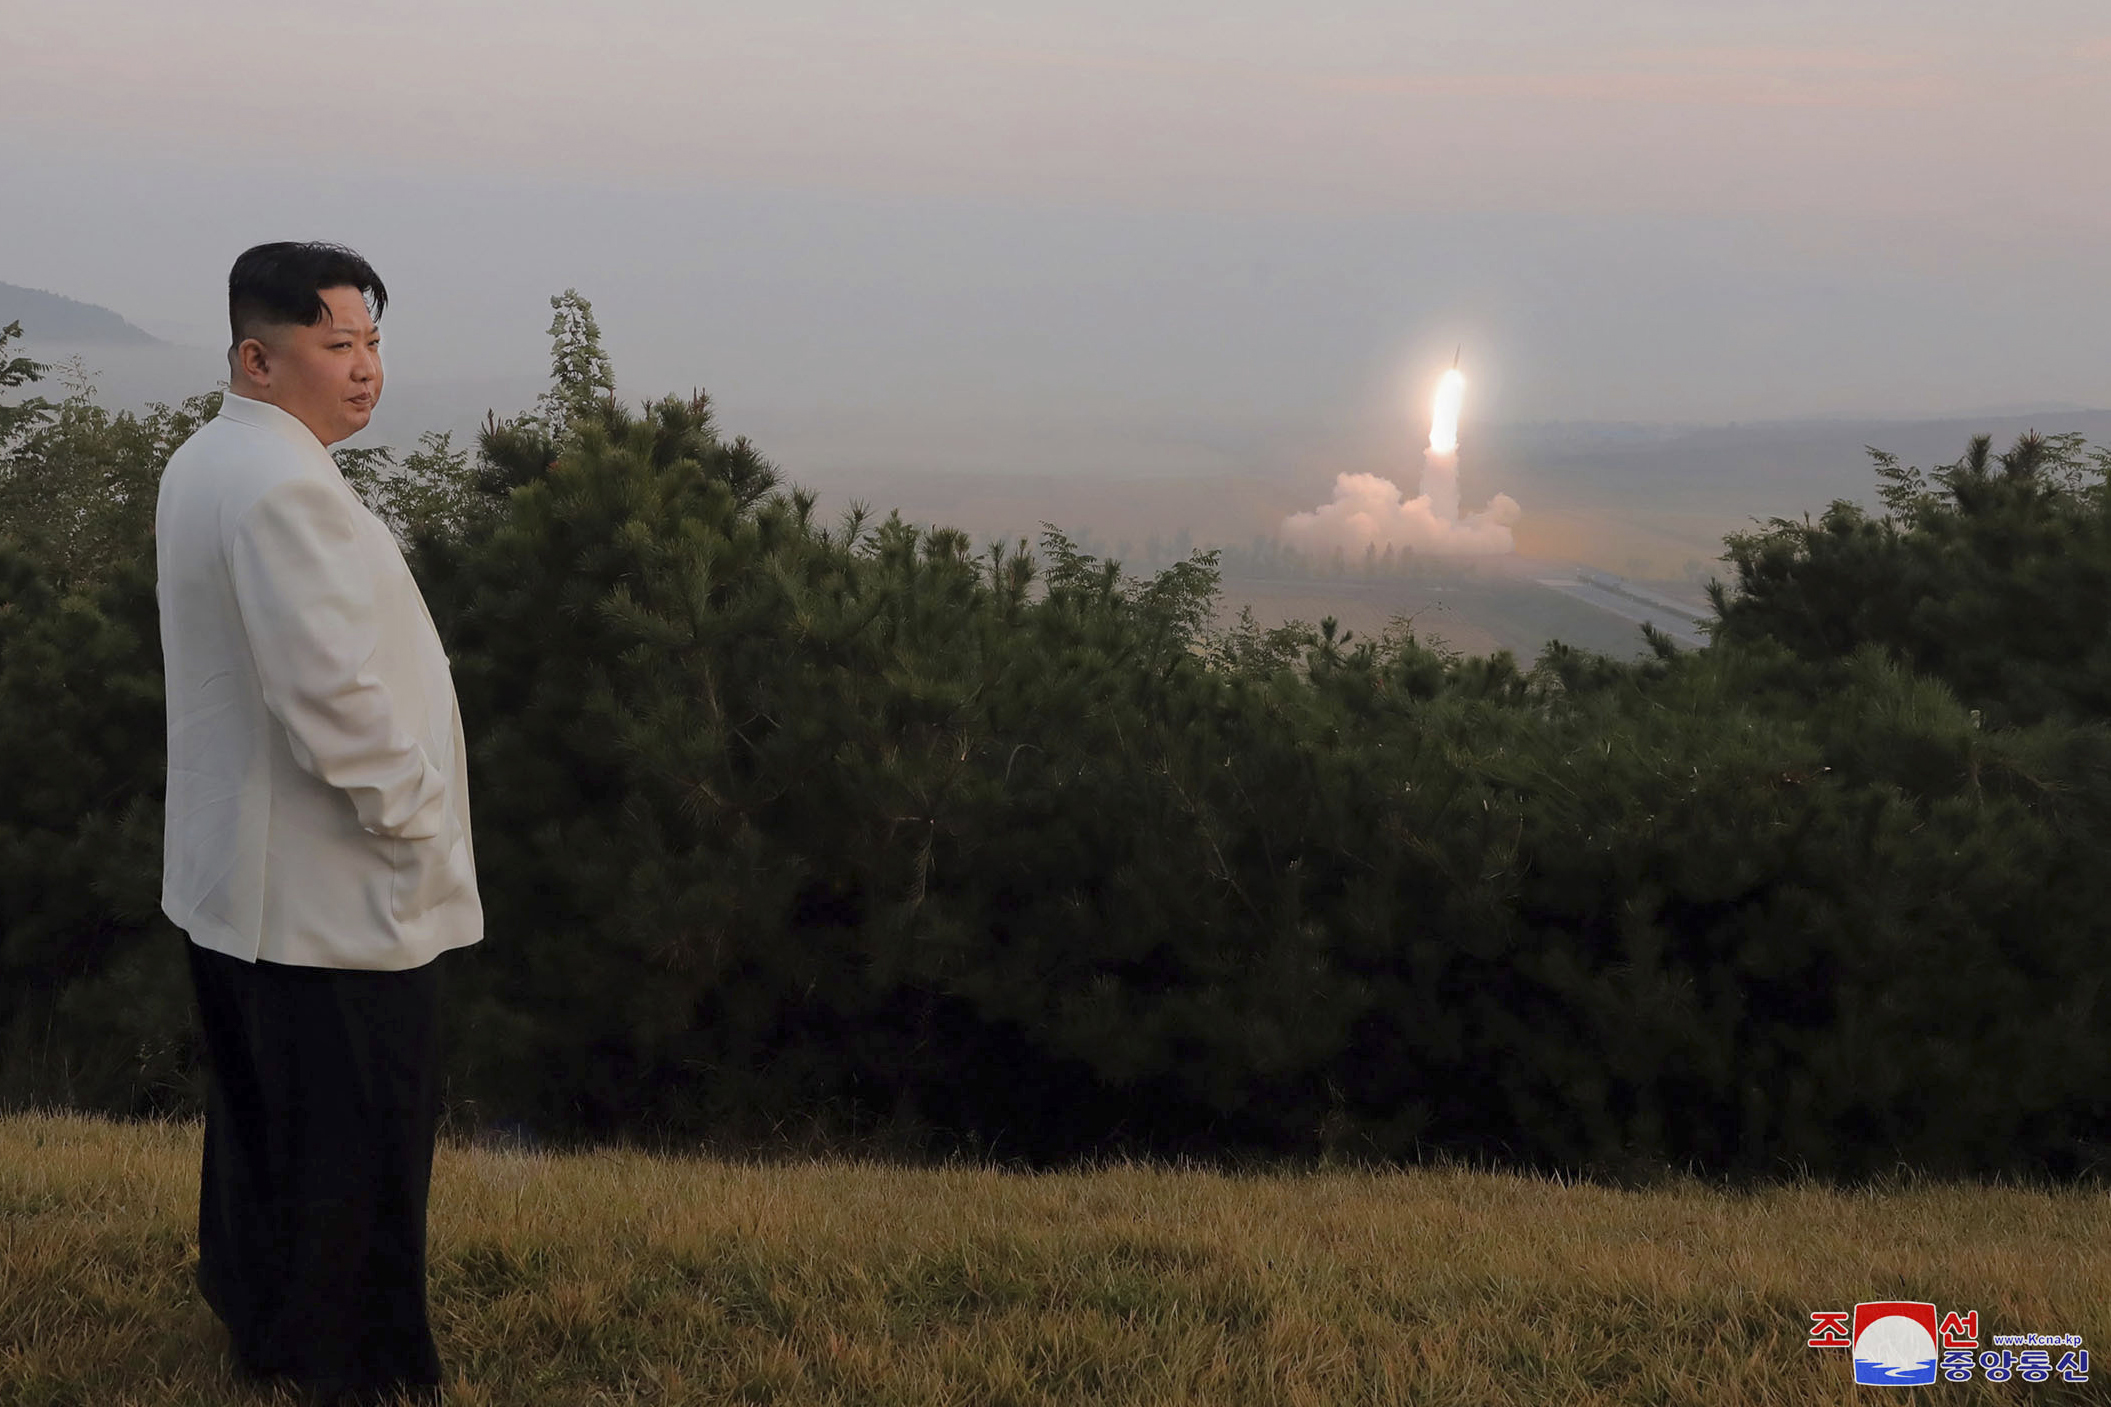 North Korean dictator Kim Jong Un watches a missile test in a photo released Monday.